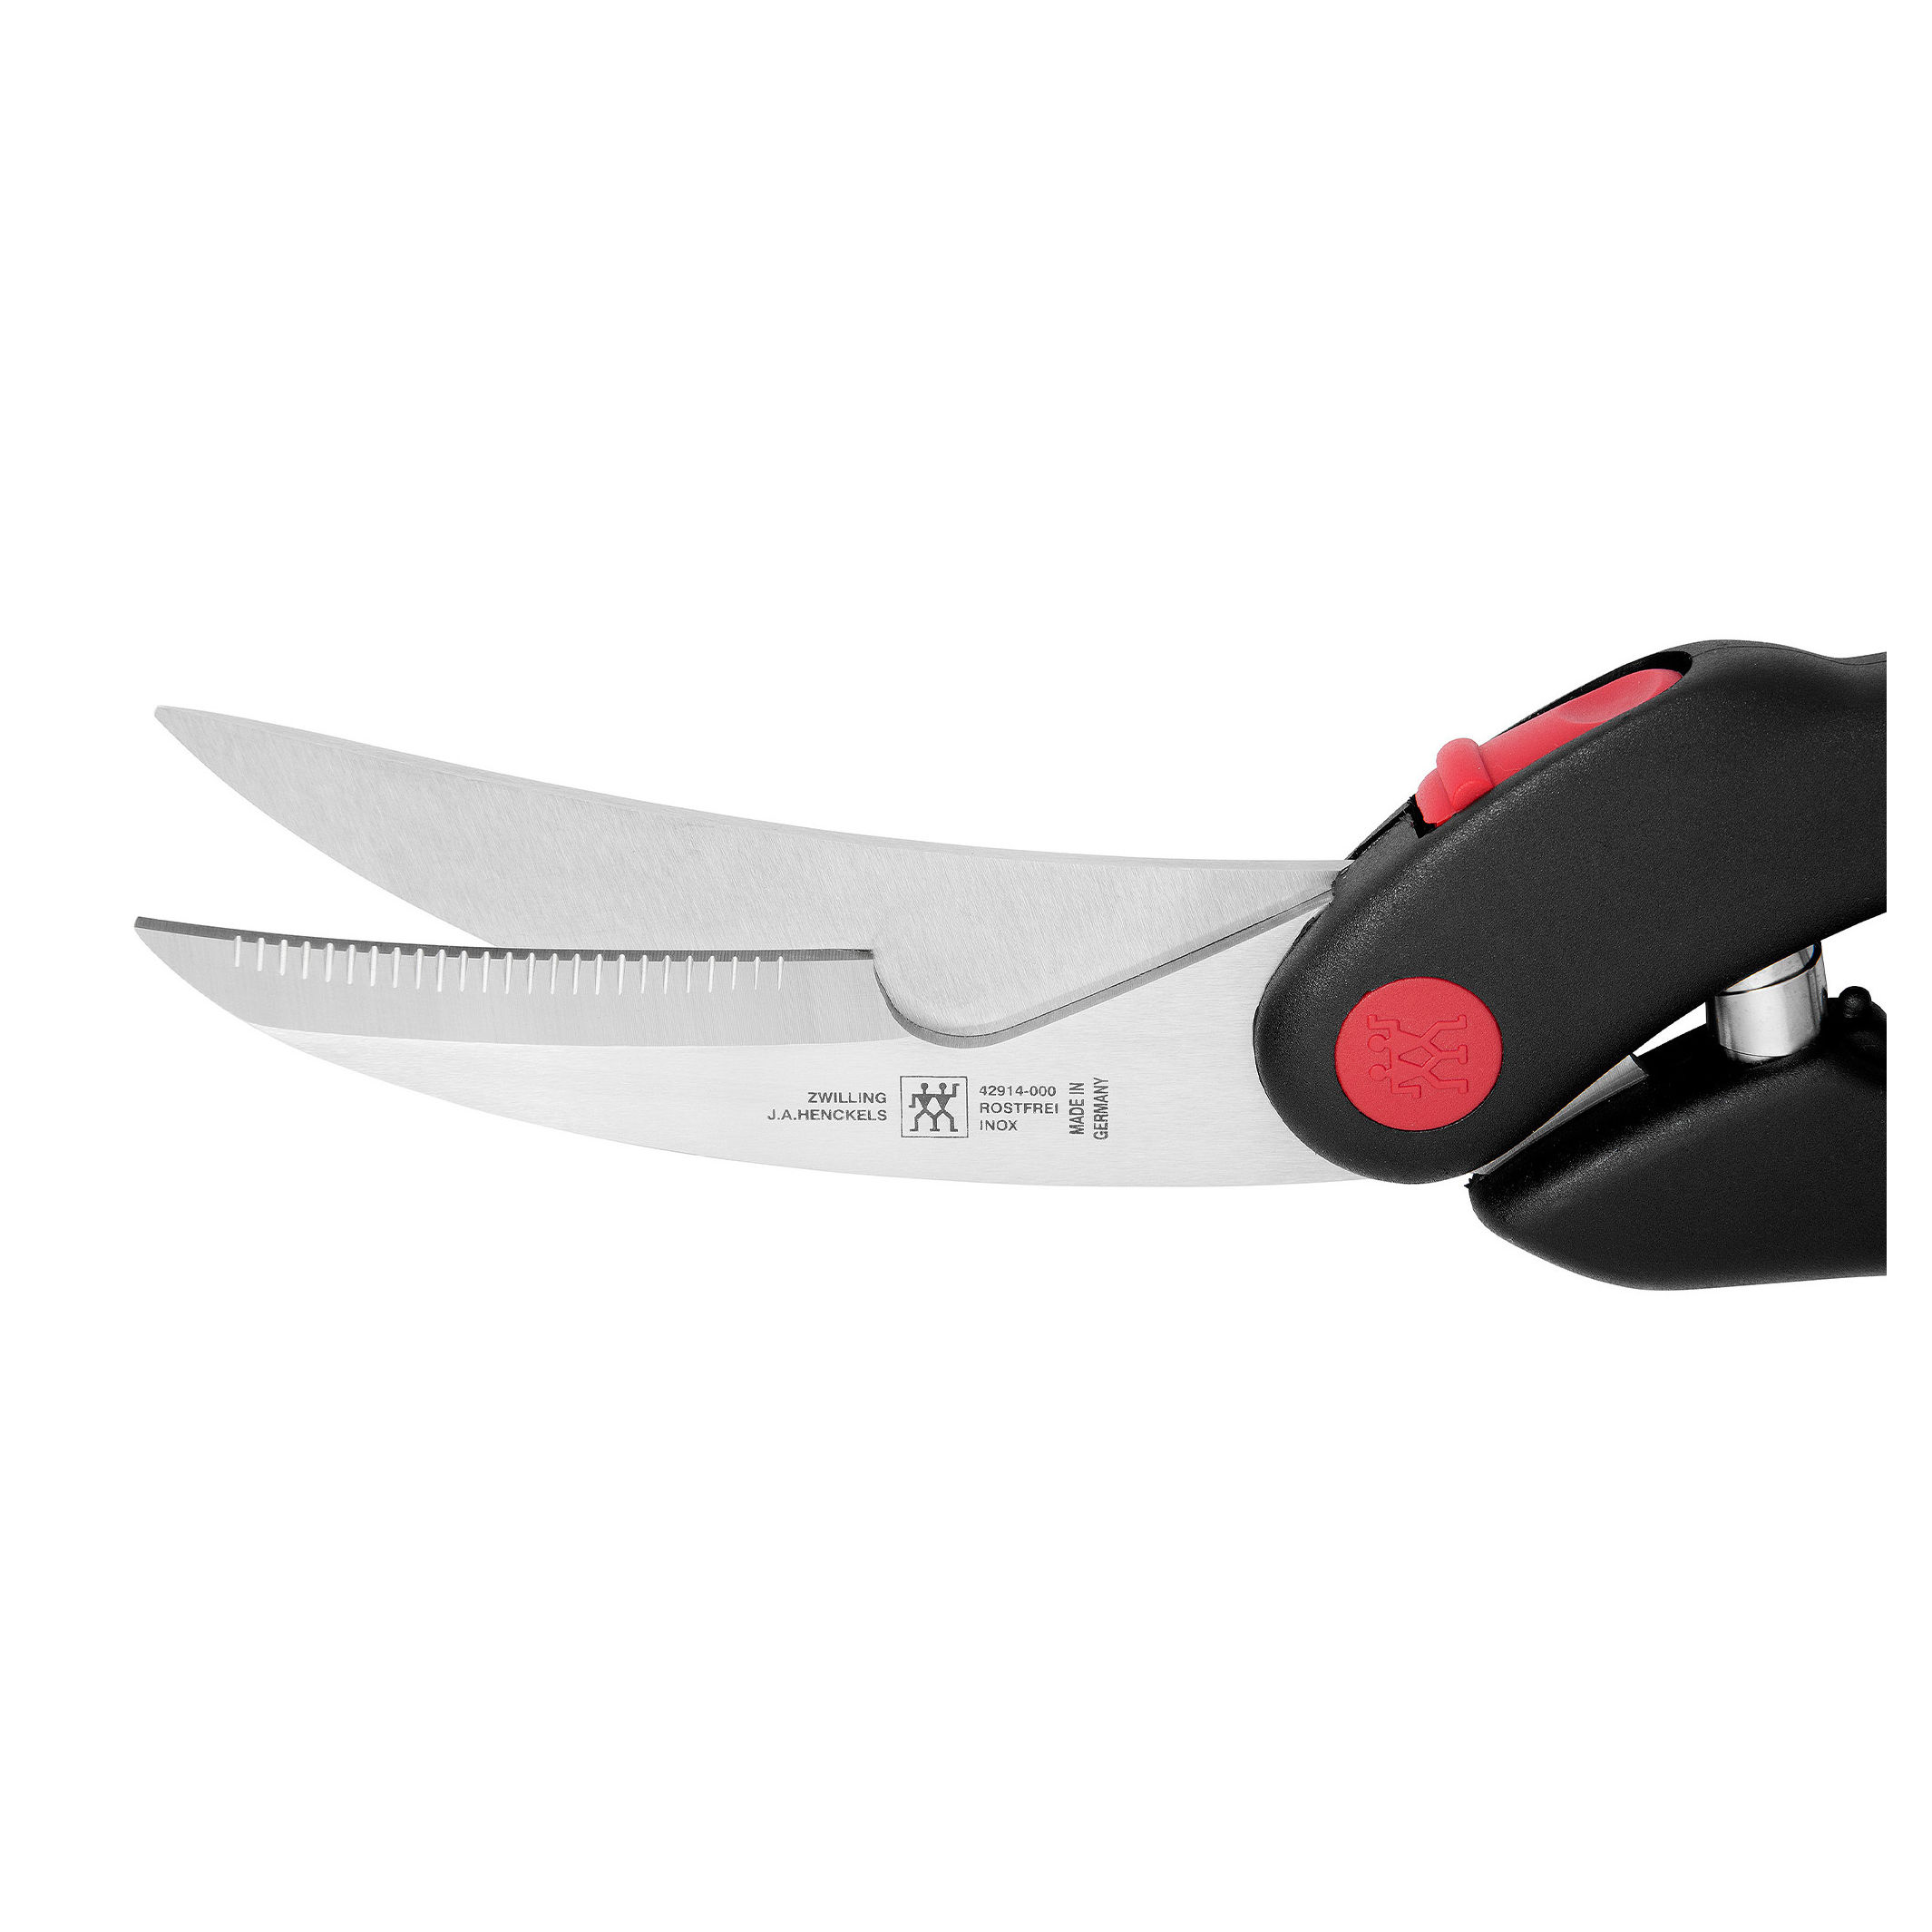 Zwilling J.A. Henckels Stainless Steel Poultry Shears – Cutlery and More